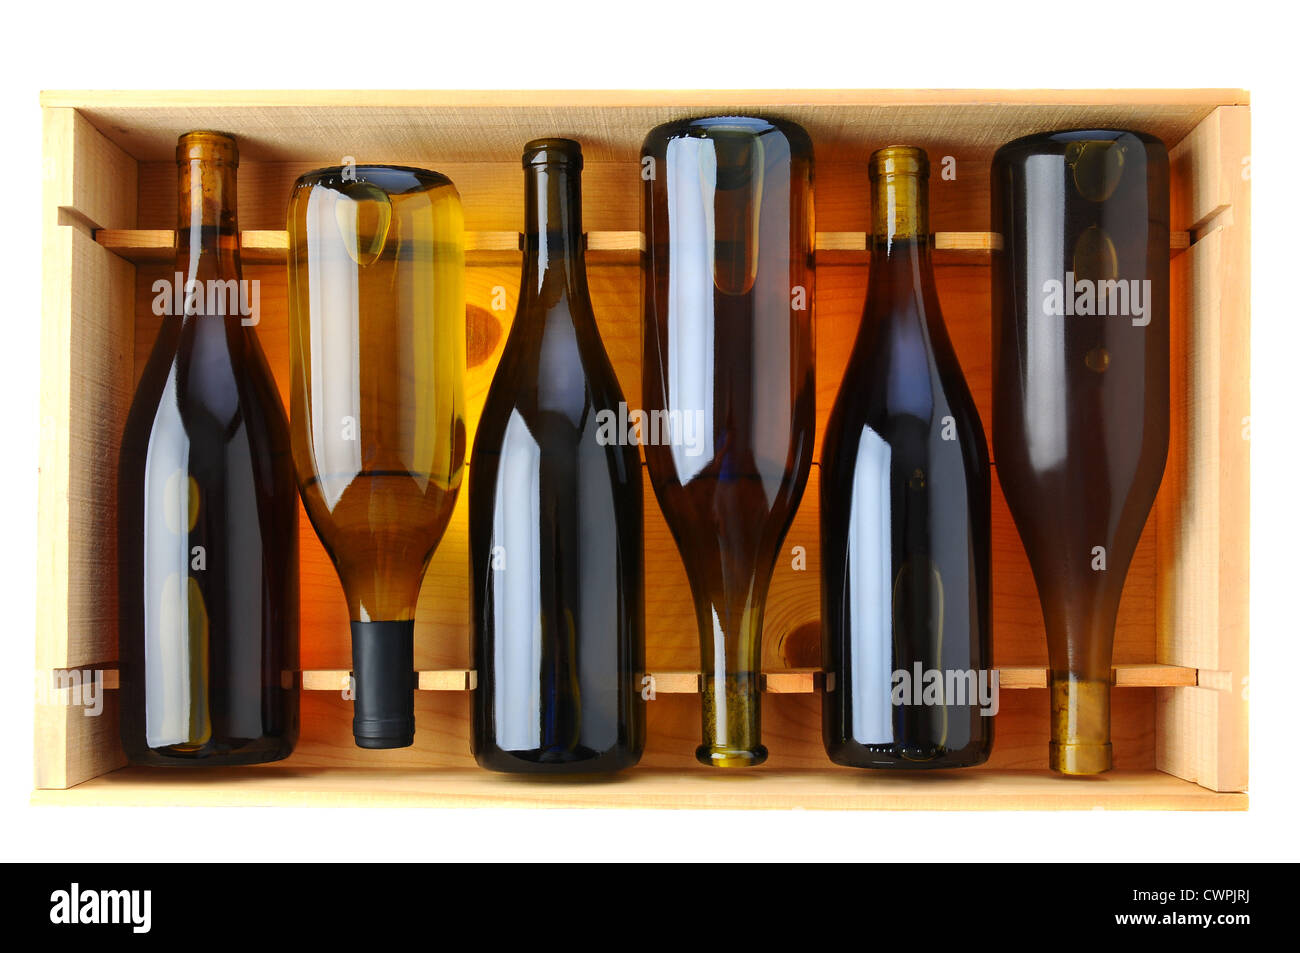 Six bottles of Chardonnay wine in a wooden case, view from above over a white background. Stock Photo